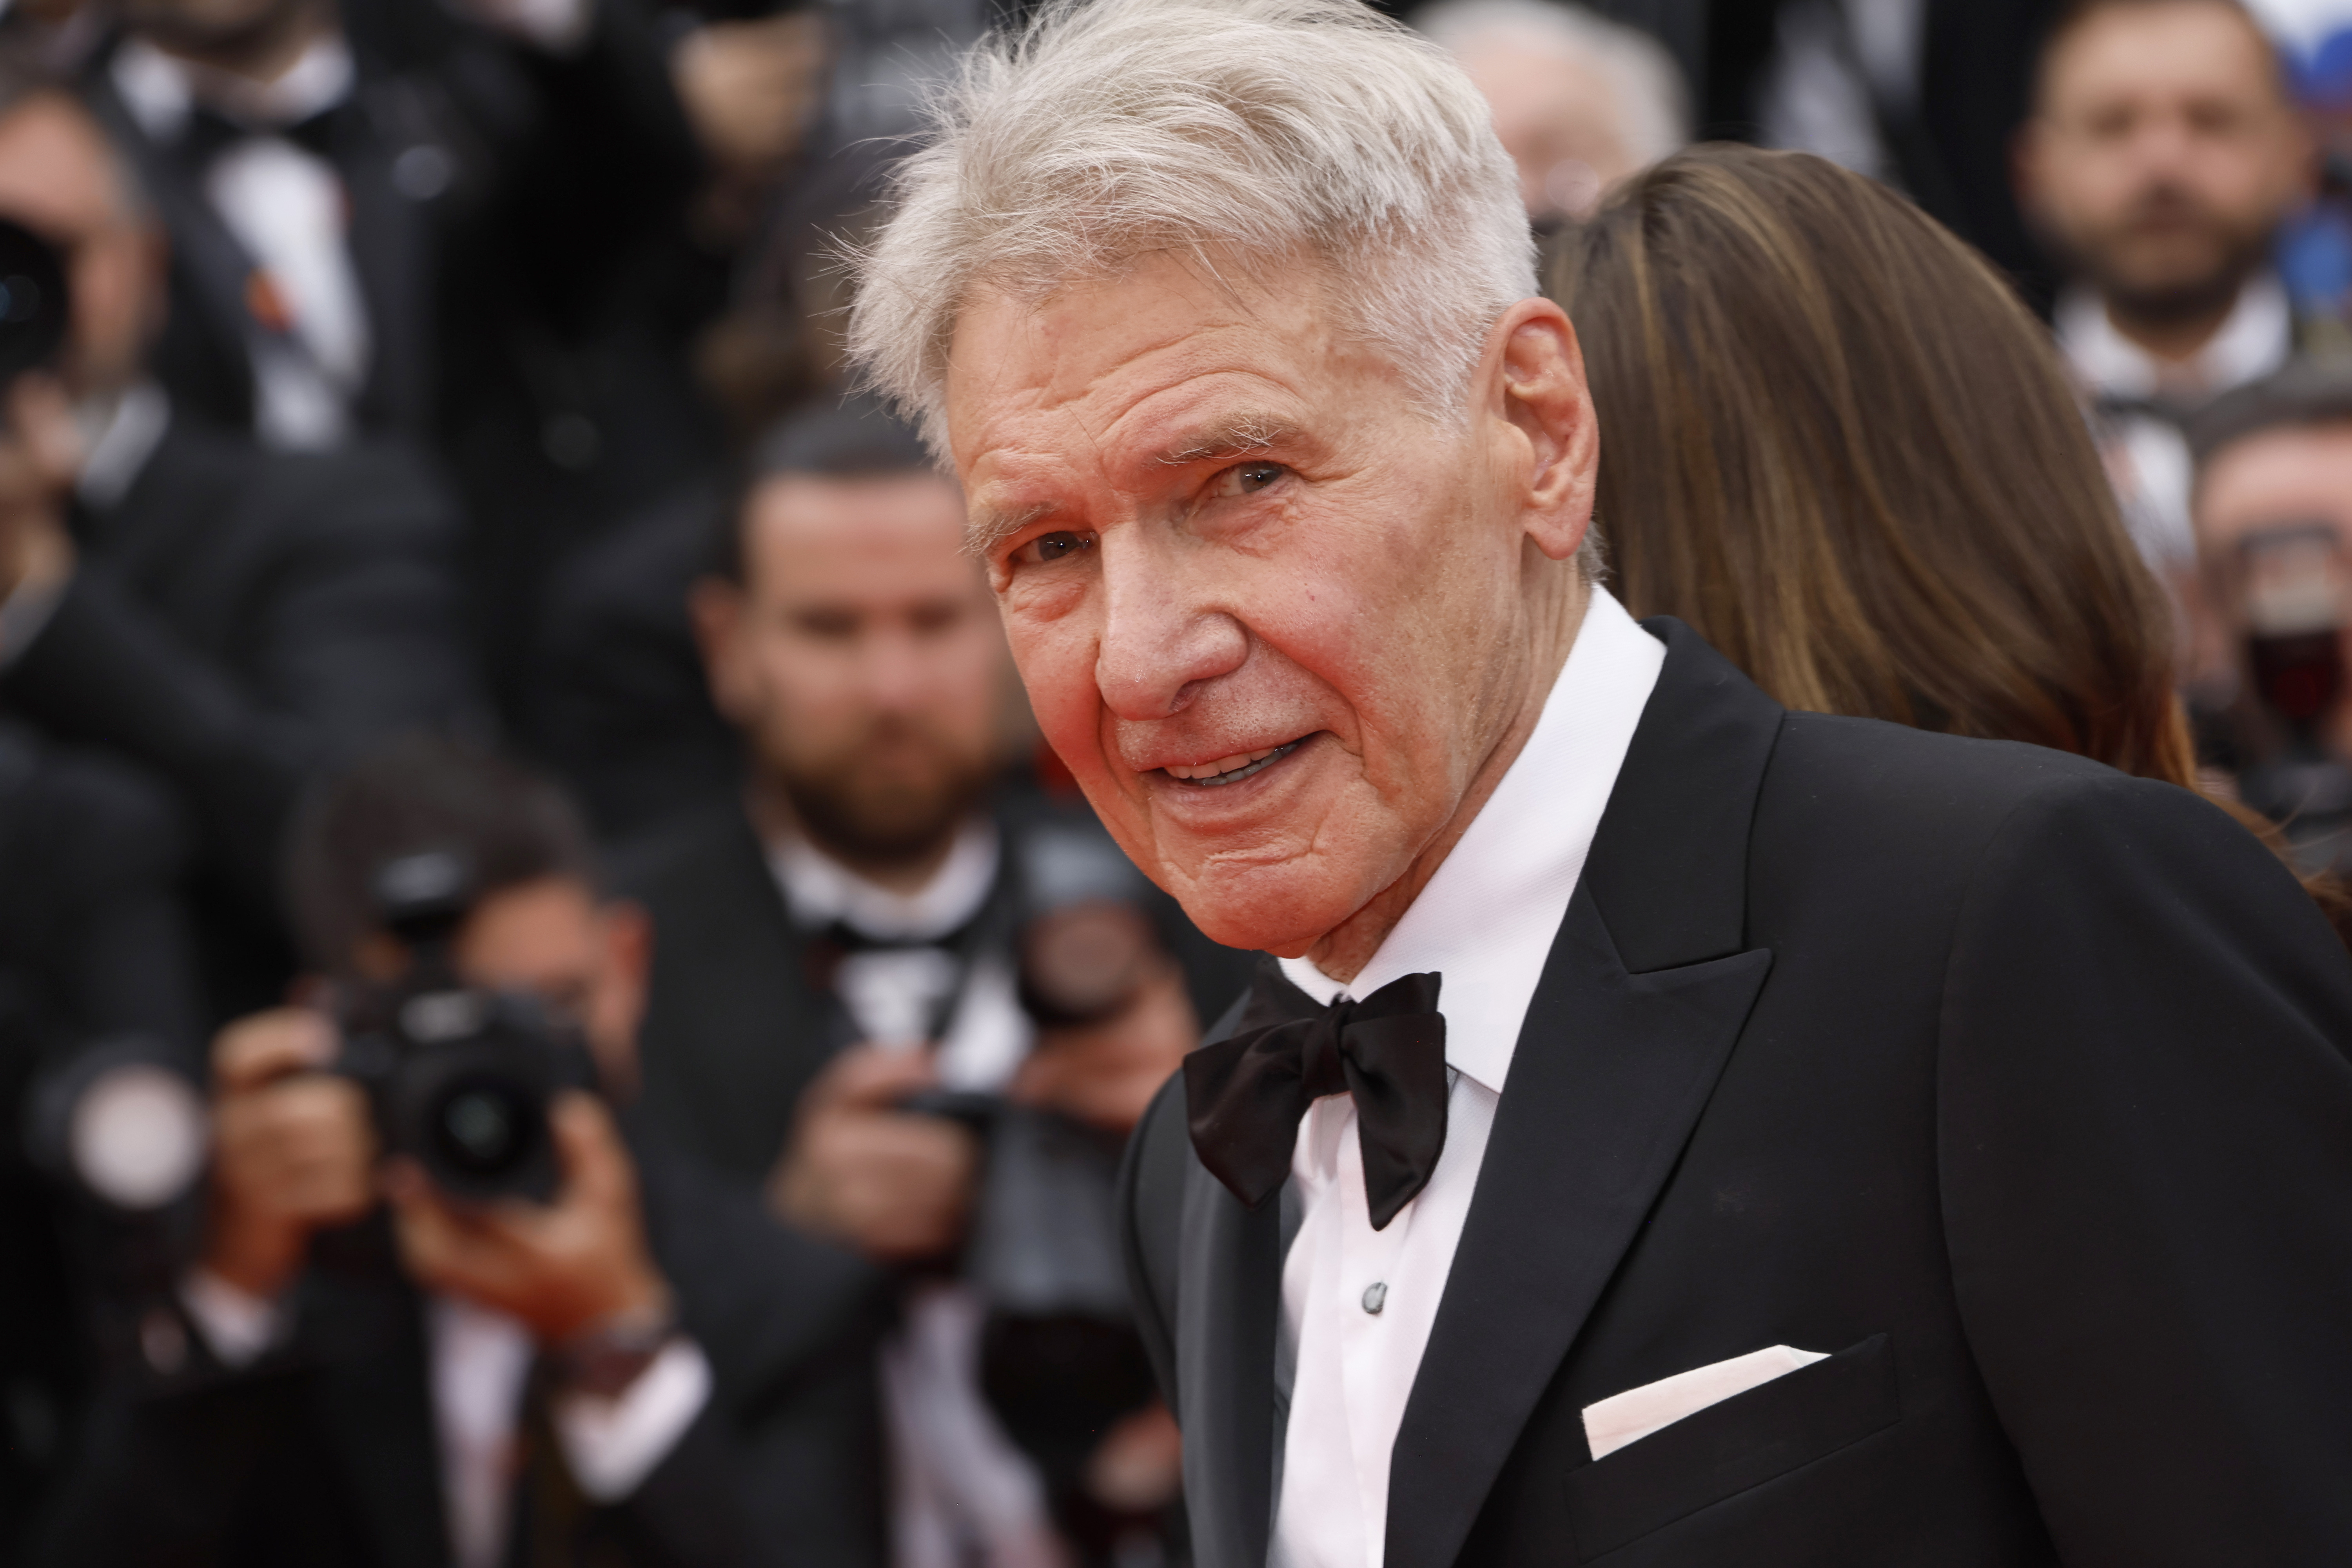 Indiana Jones' swings into Cannes Film Festival; Harrison Ford honored  before joyous festivalgoers - The Columbian